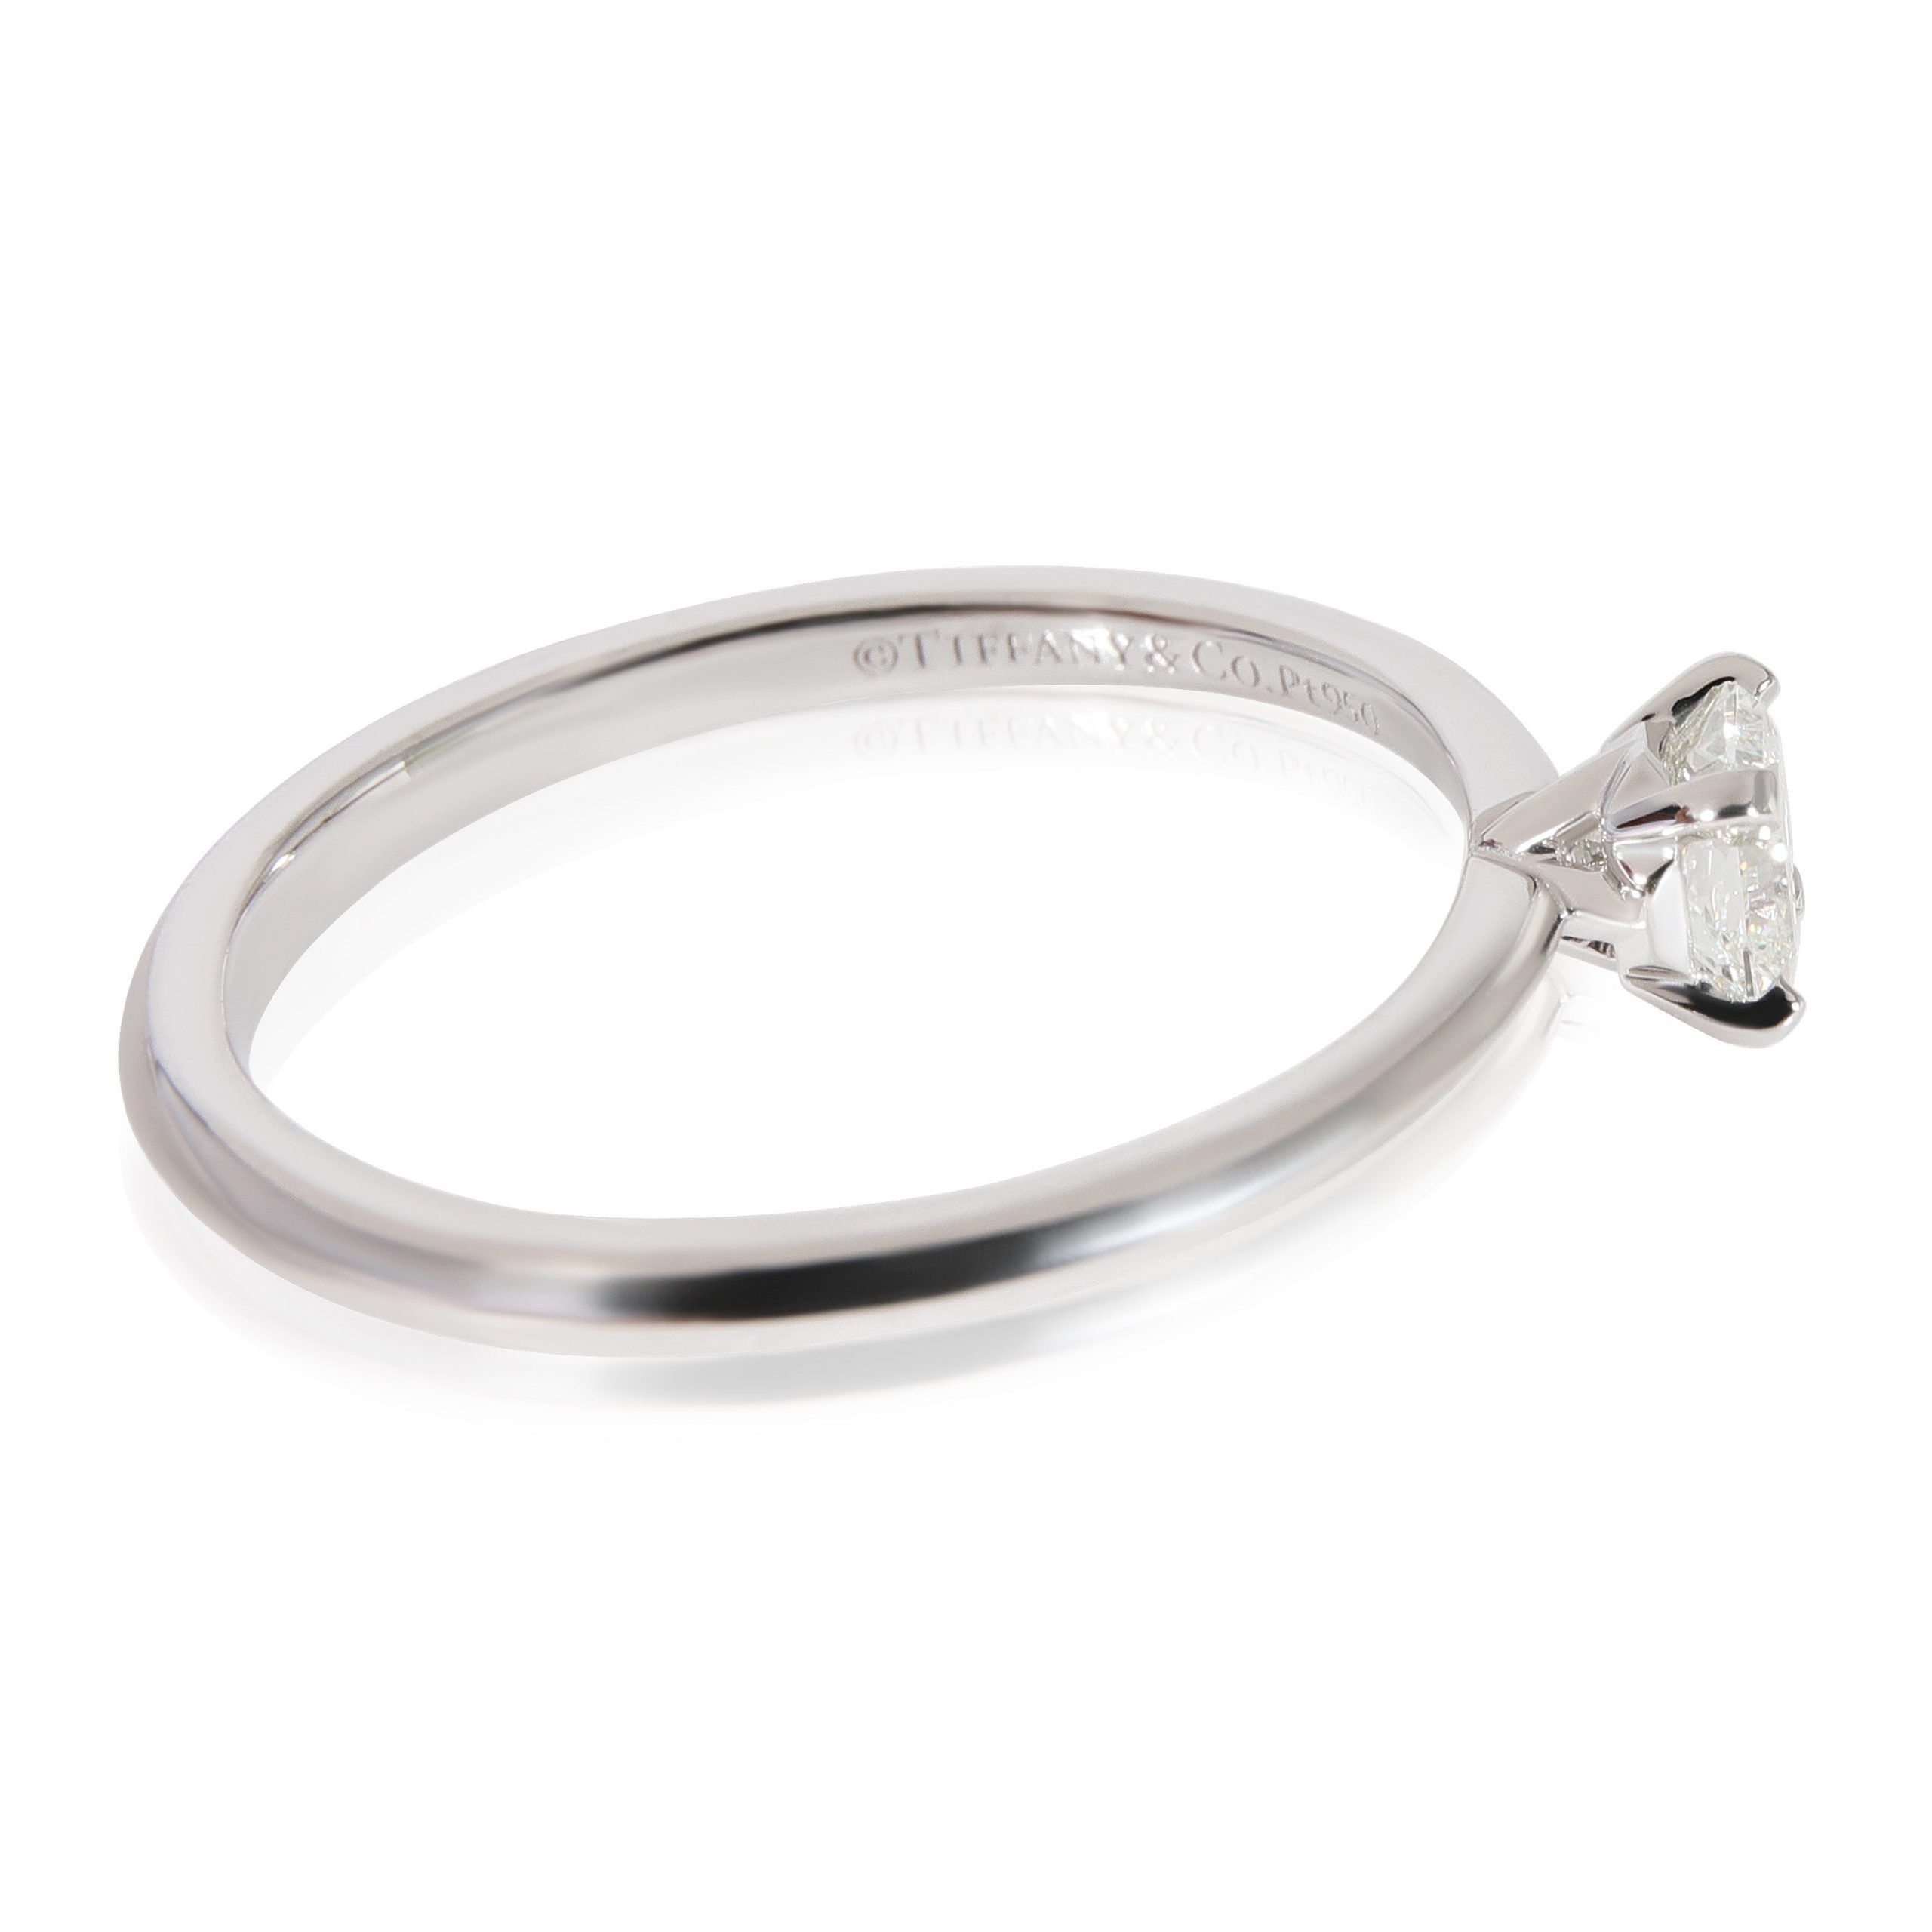 Tiffany & Co. Tiffany & Co. Diamond Solitaire Engagement Ring in Platinum I VS1 0.27 CTW Size ONE SIZE - 2 Preview